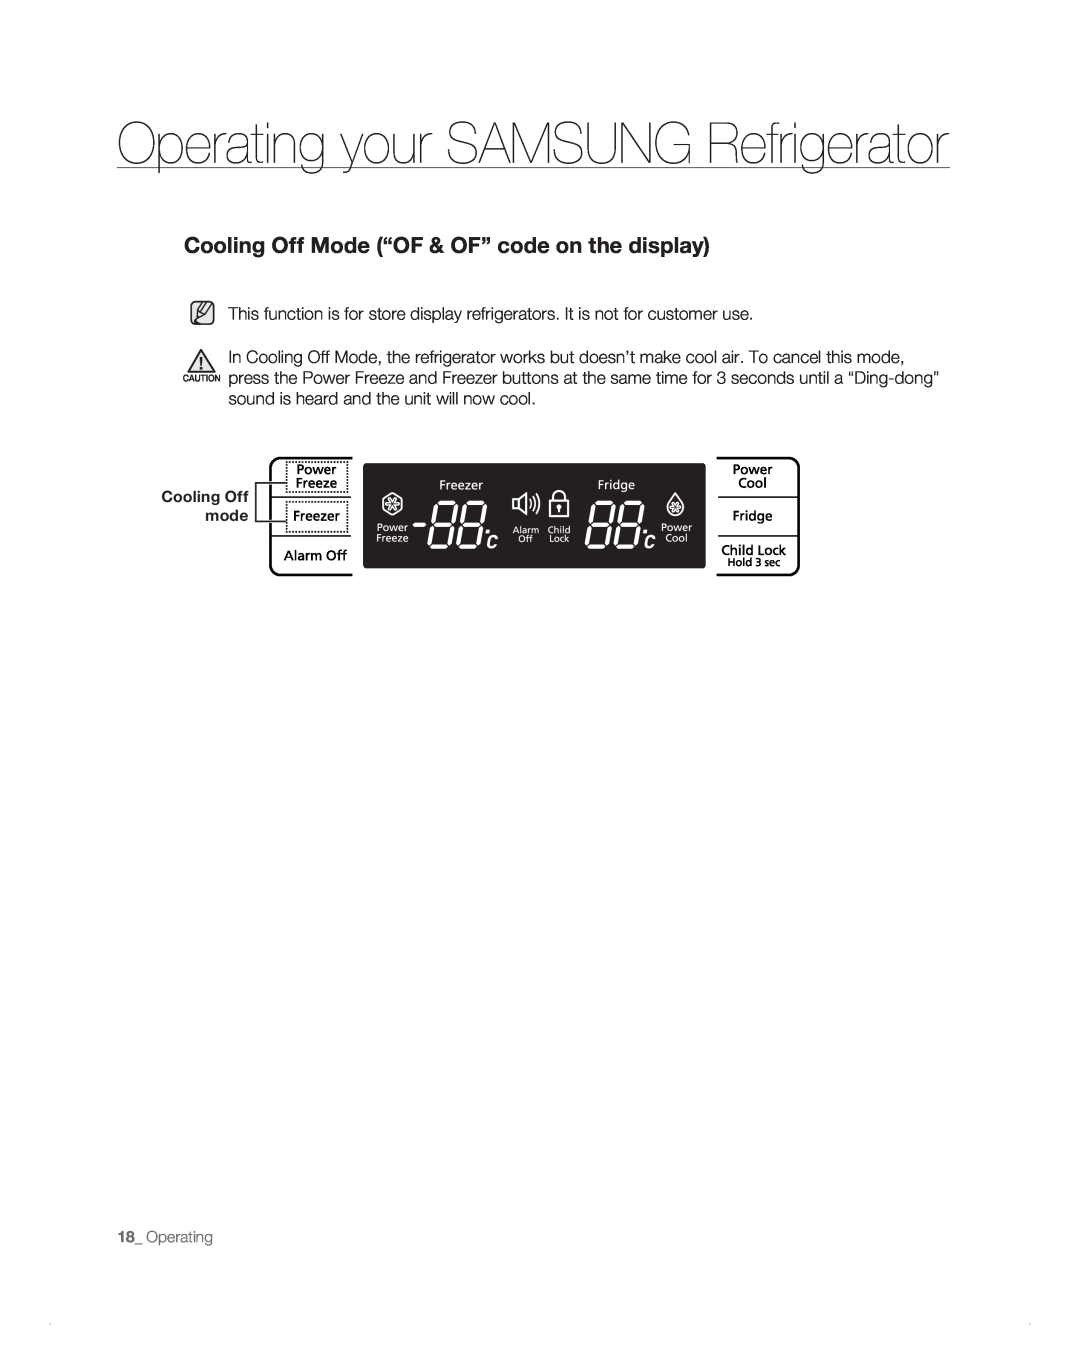 Samsung RB214AB, RB1AB Operating your SAMSUNG Refrigerator, Cooling Off Mode “OF & OF” code on the display, 18_ Operating 